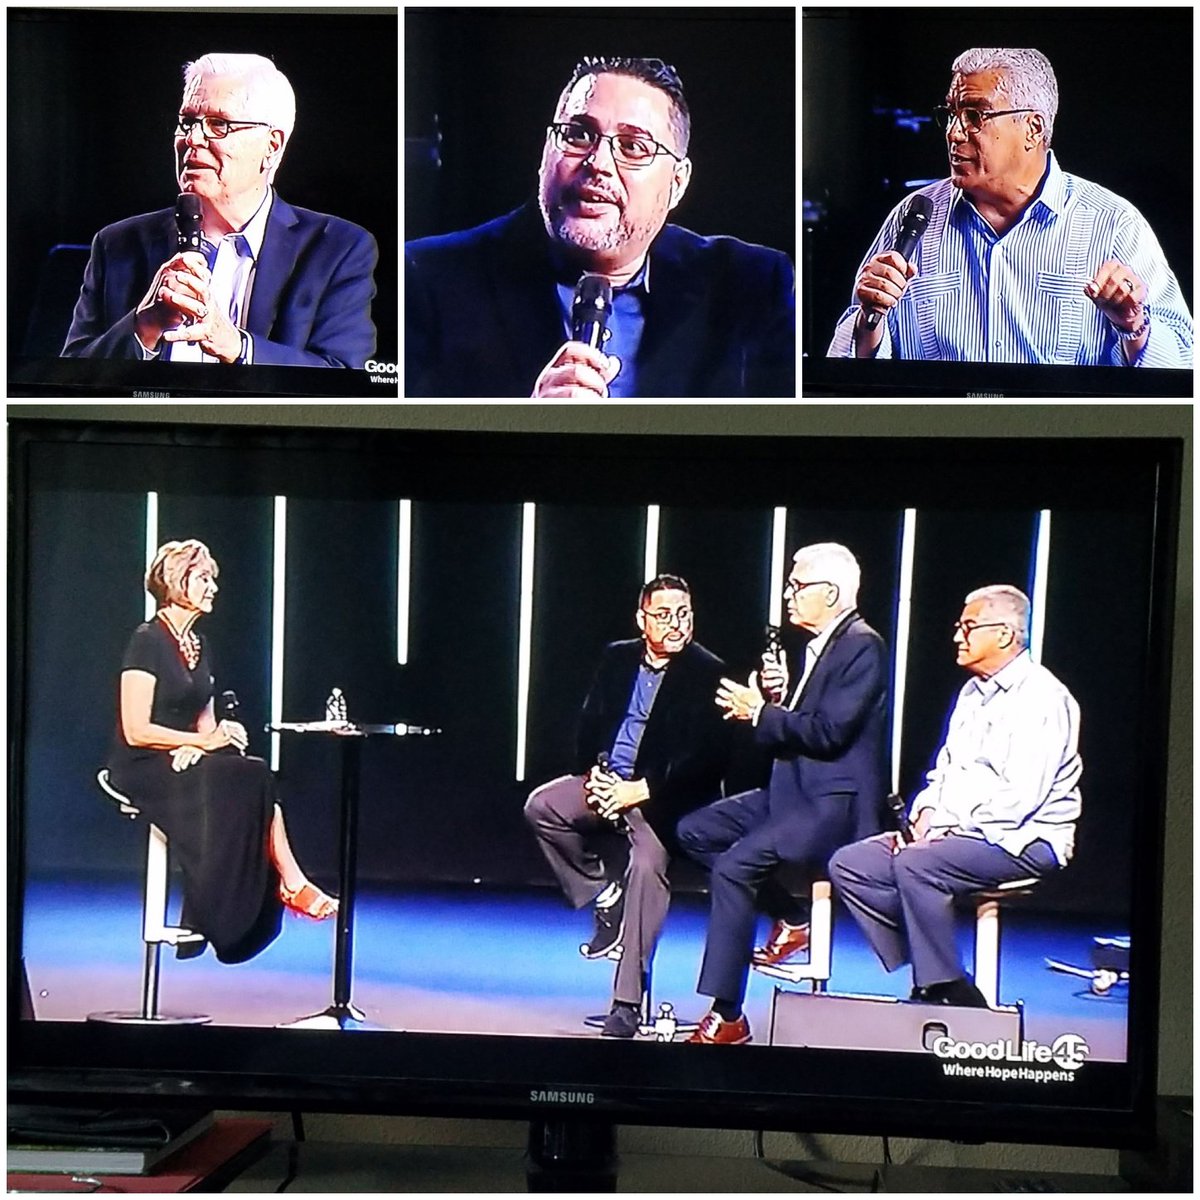 Happy Thanksgiving to all. Today @thegoodlife45 aired this interview about The Church and Compassion & Justice. Joined by @RichStearns former president of @WorldVisionUSA @NinoGonzalez2 of @cccorl & @FMD_AG & @salgueros of @cccorl & @NalecNews #CompassionAndJustice